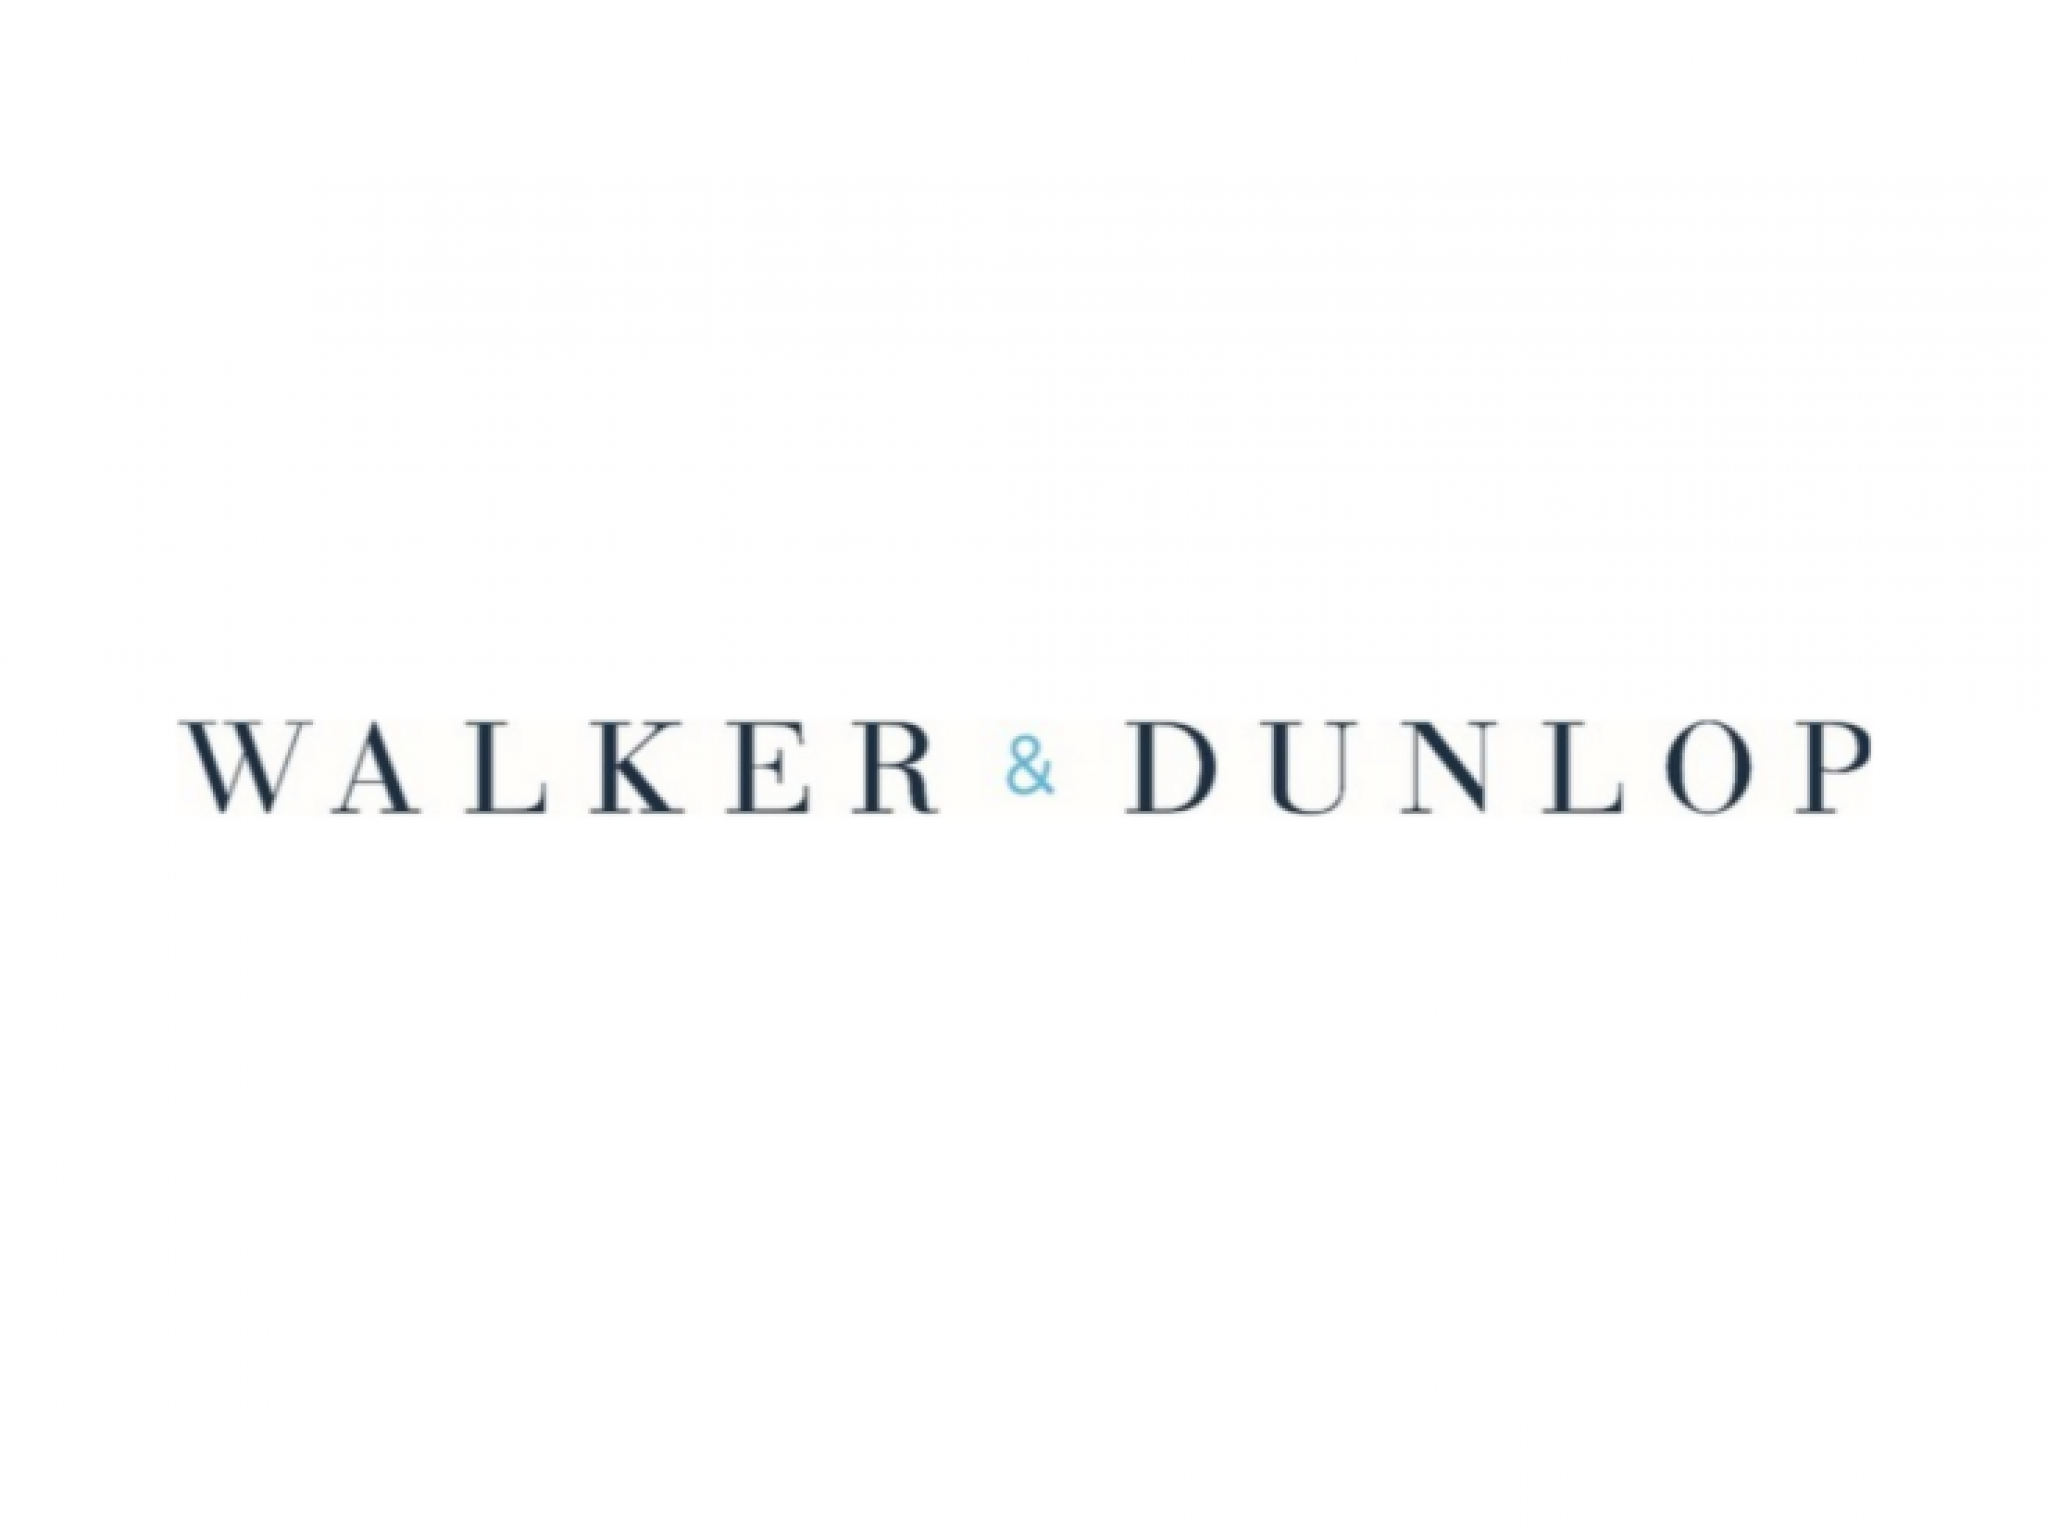  whats-going-on-with-walker--dunlop-shares-today 